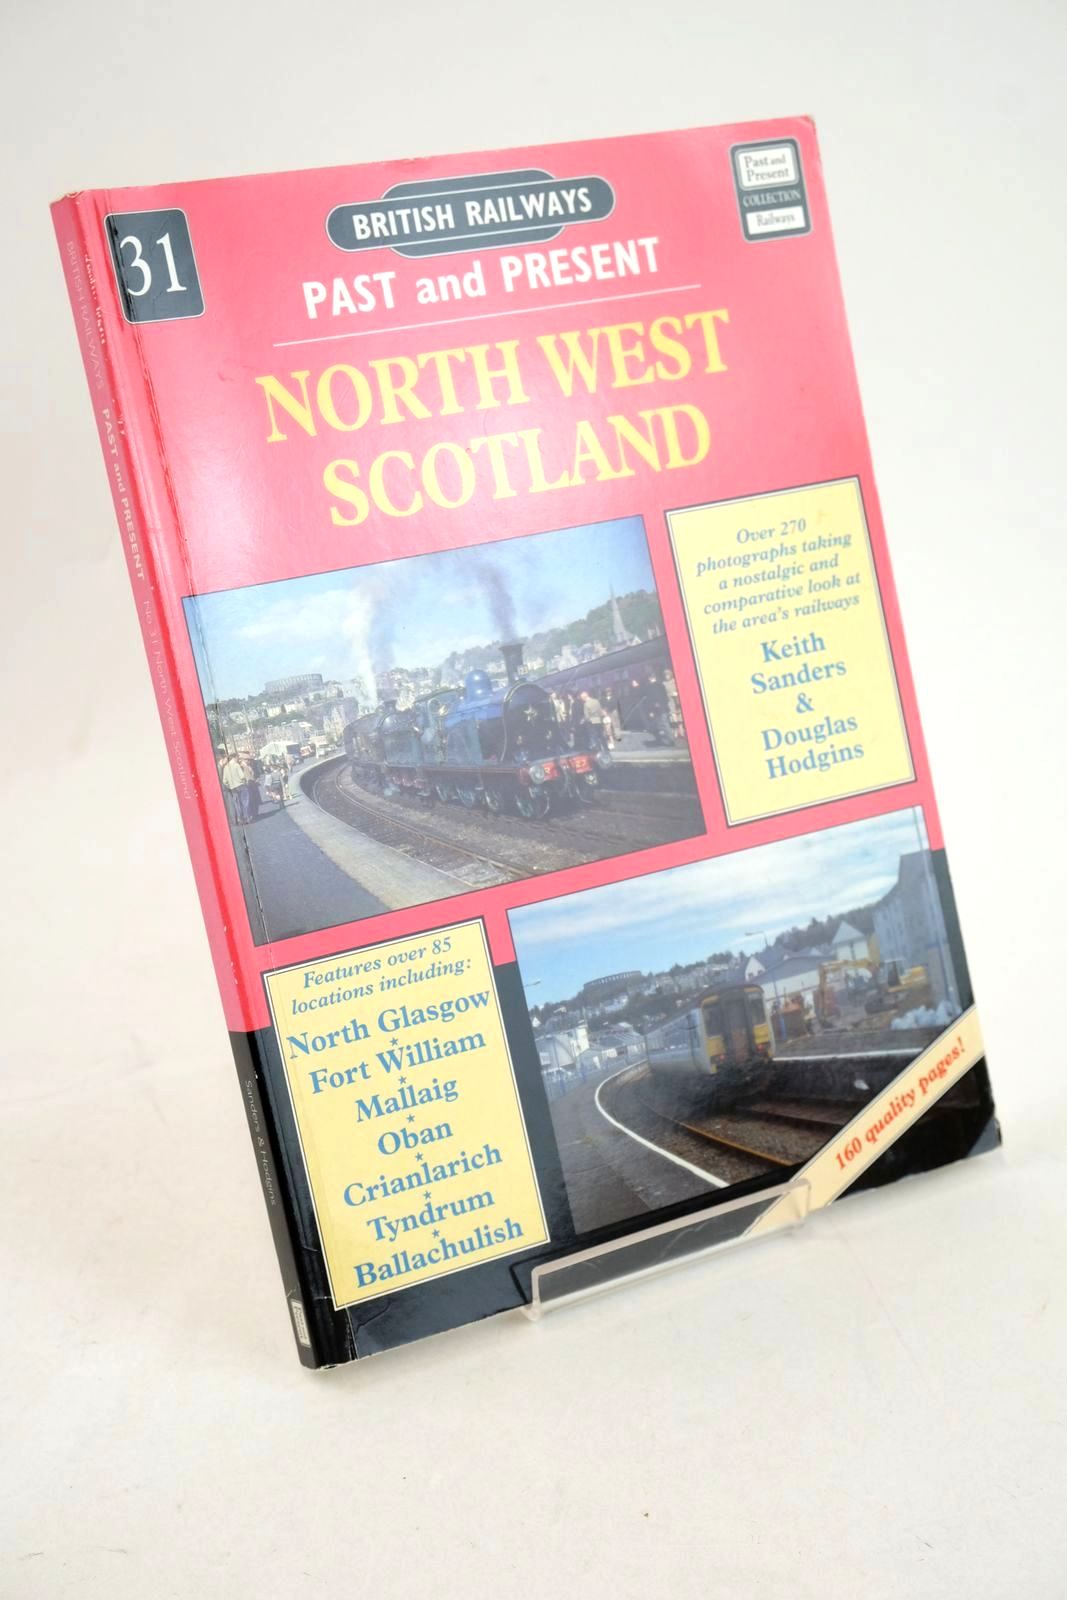 Photo of BRITISH RAILWAYS PAST AND PRESENT No. 31 NORTH WEST SCOTLAND written by Sanders, Keith Hodgins, Douglas published by Past and Present Publishing Ltd. (STOCK CODE: 1327546)  for sale by Stella & Rose's Books